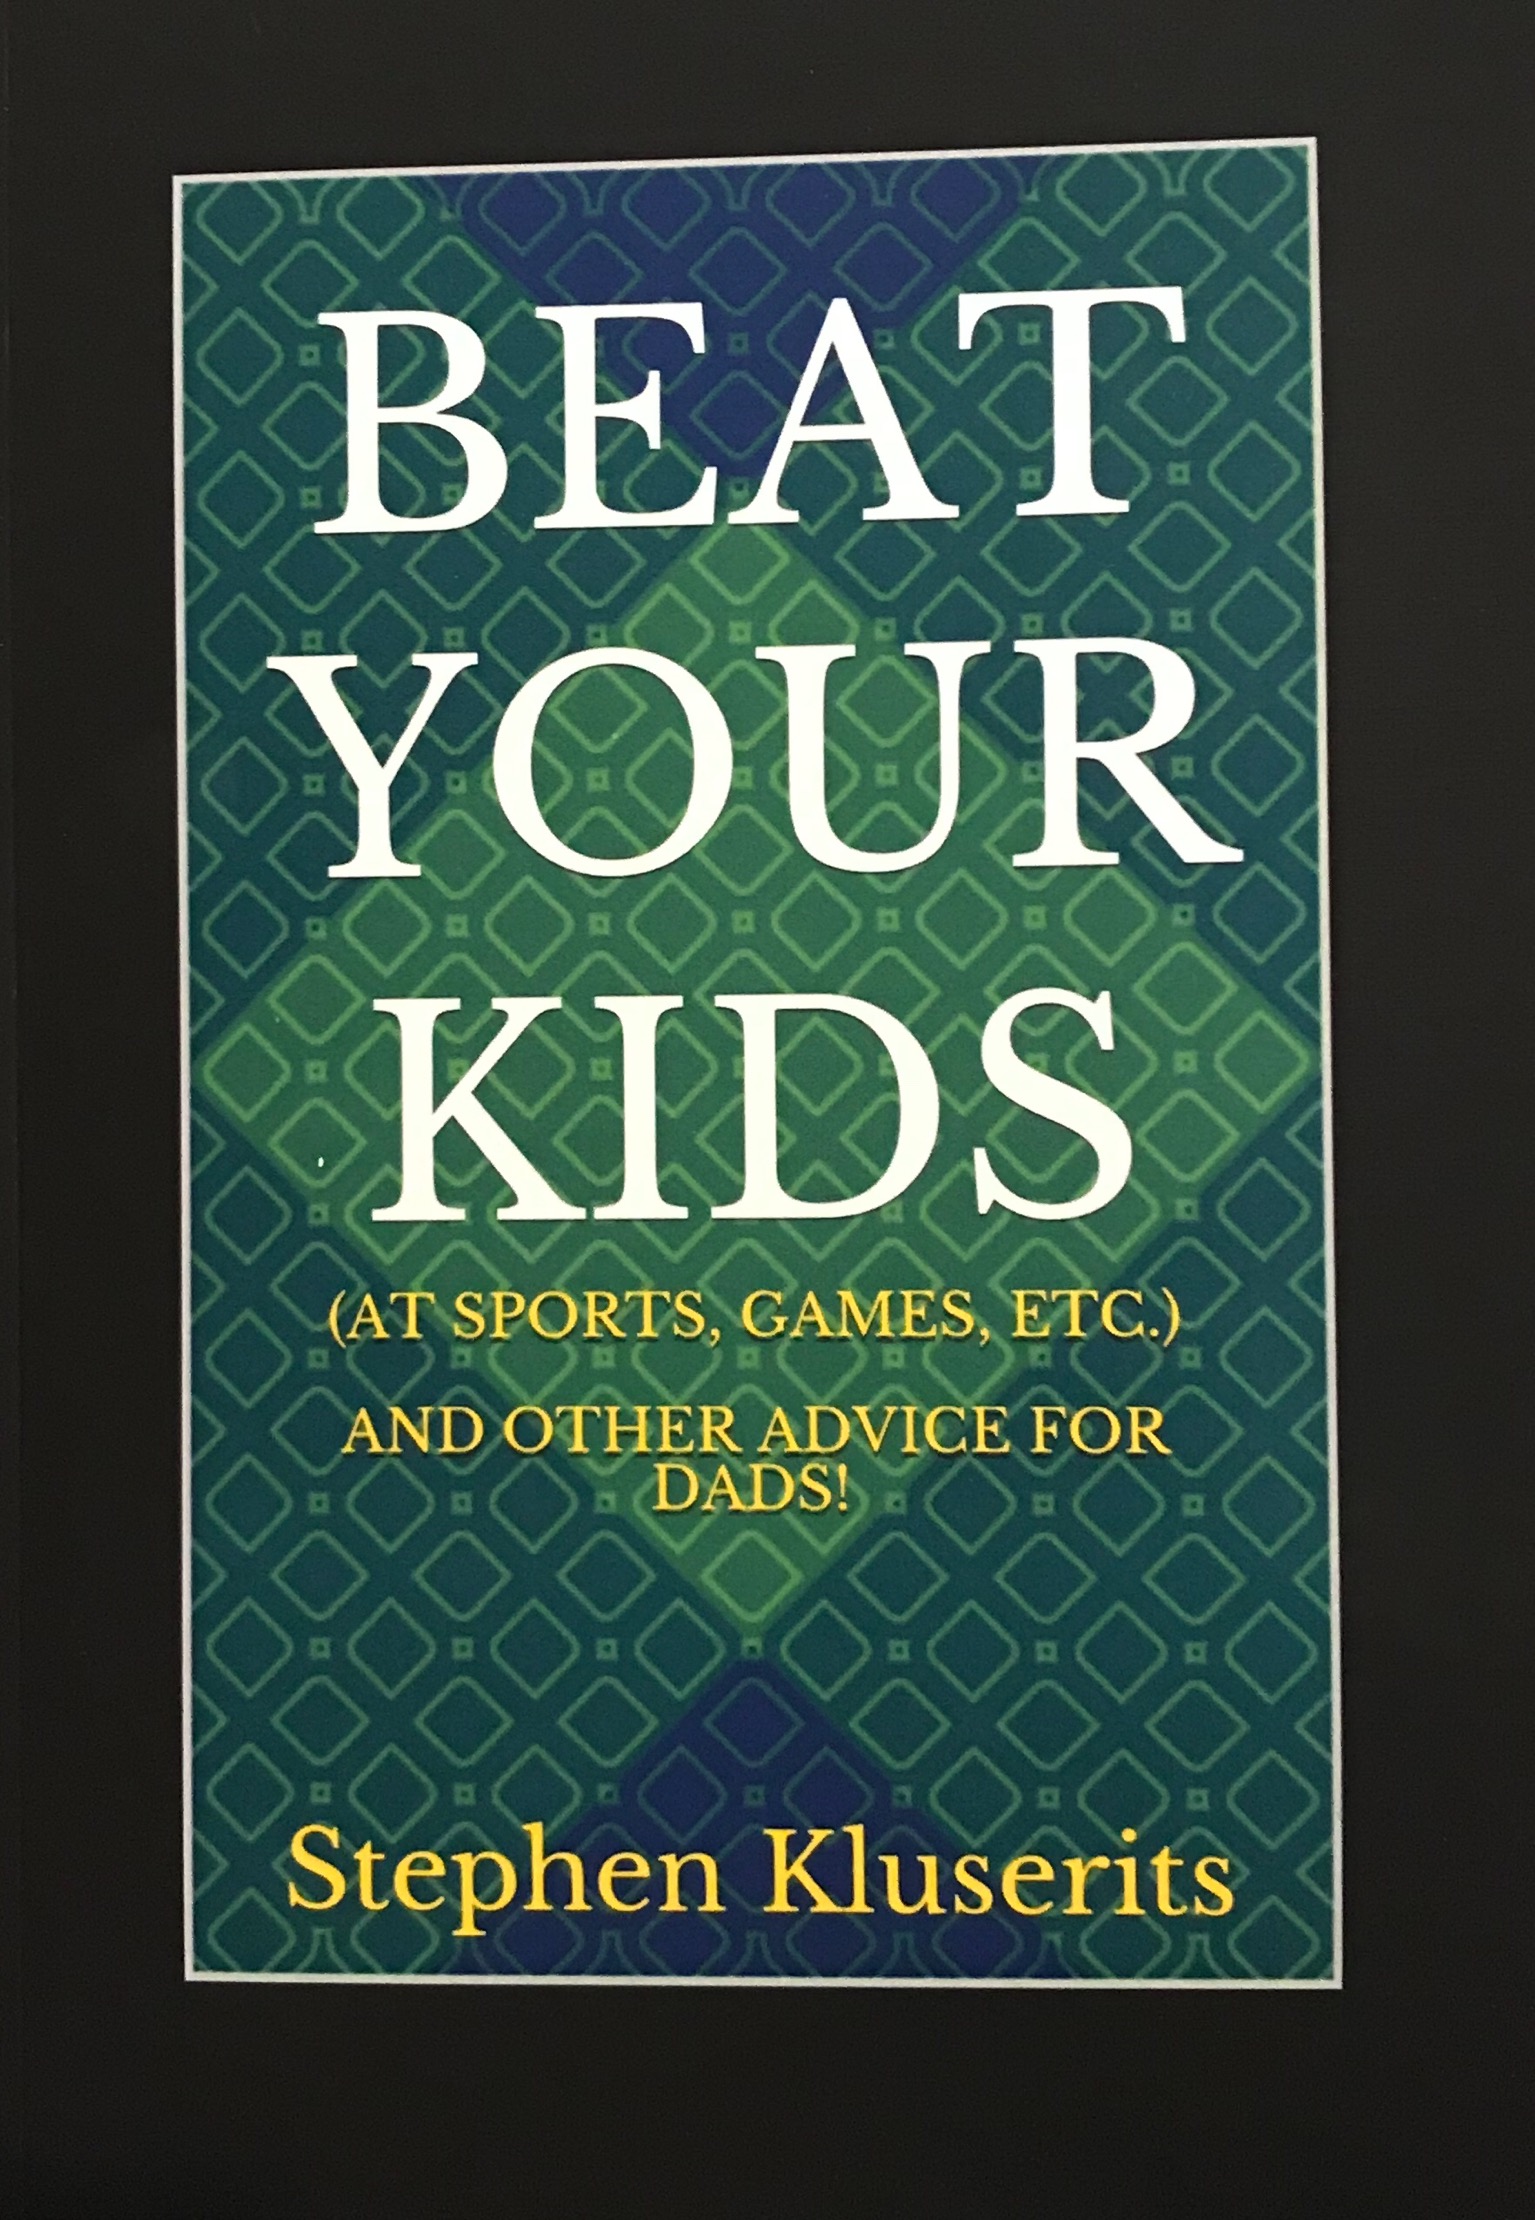 FREE: Beat Your Kids (at sports, games, etc.) and other advice for dads. by Stephen Kluserits